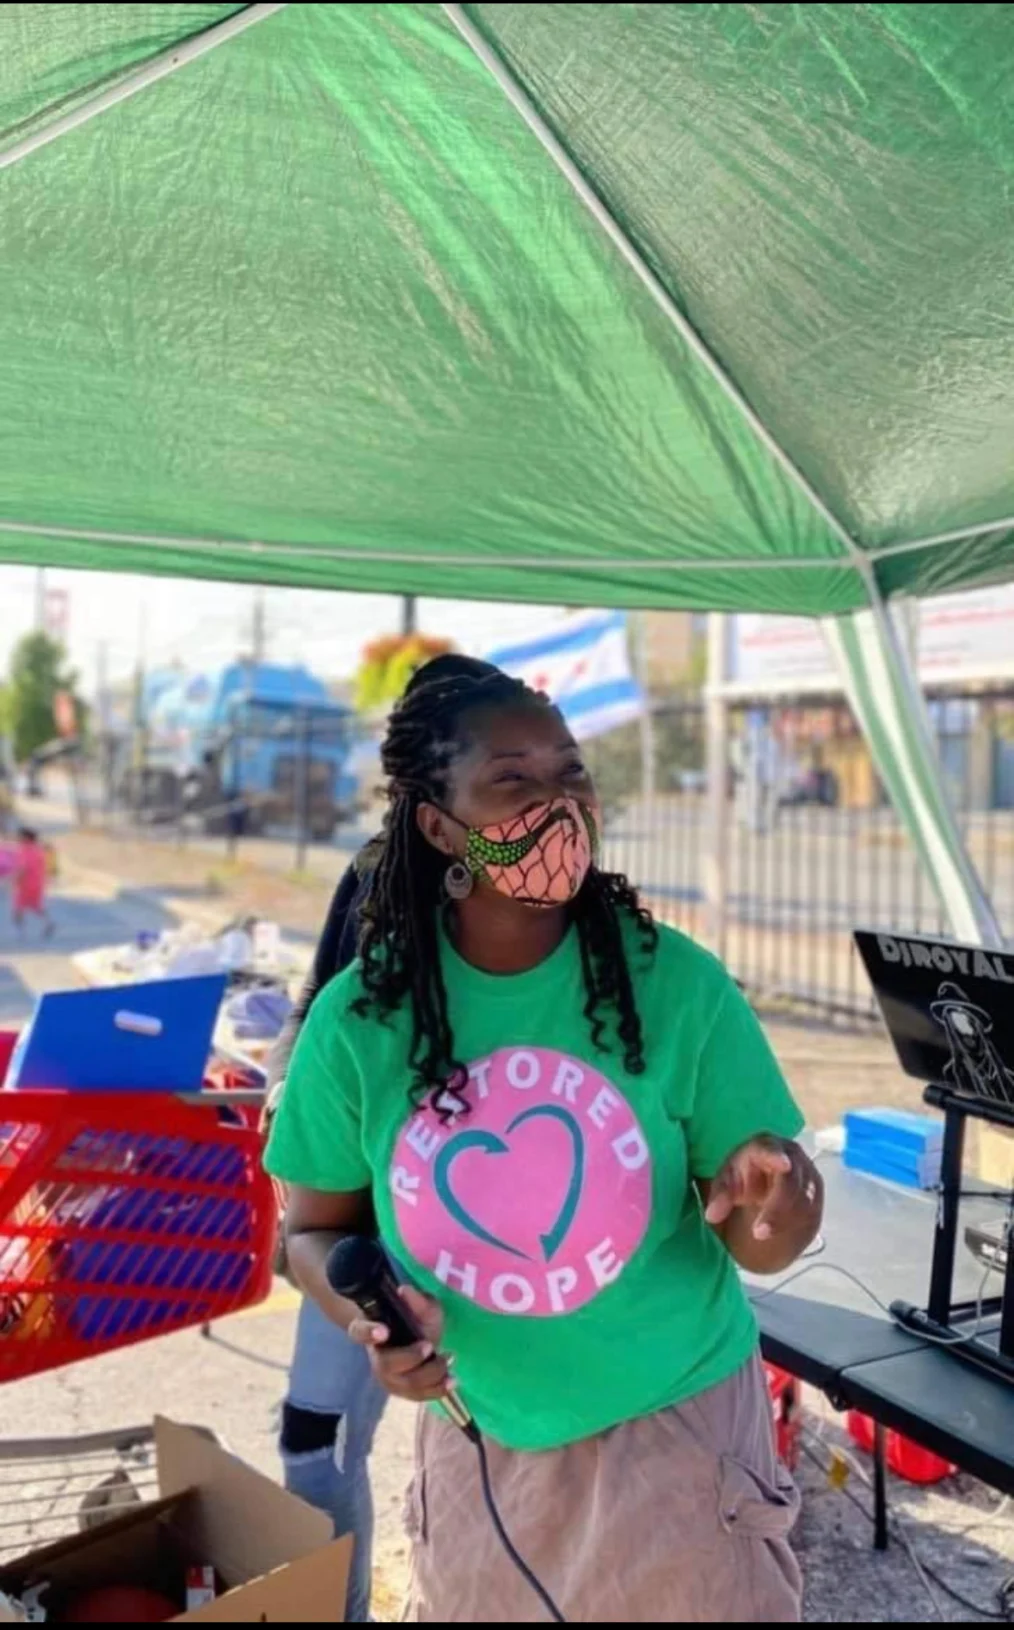 A Black woman with a deep skin tone stands  underneath a large green umbrella on a boardwalk. She has dreadlocks that hit past her shoulders and is wearing a green and pink shirt that reads, “Restored Hope.” She wears a patterned face mask and holds a microphone. Behind the woman is a red shopping cart, a stack of blue signs, and a DJ set up.